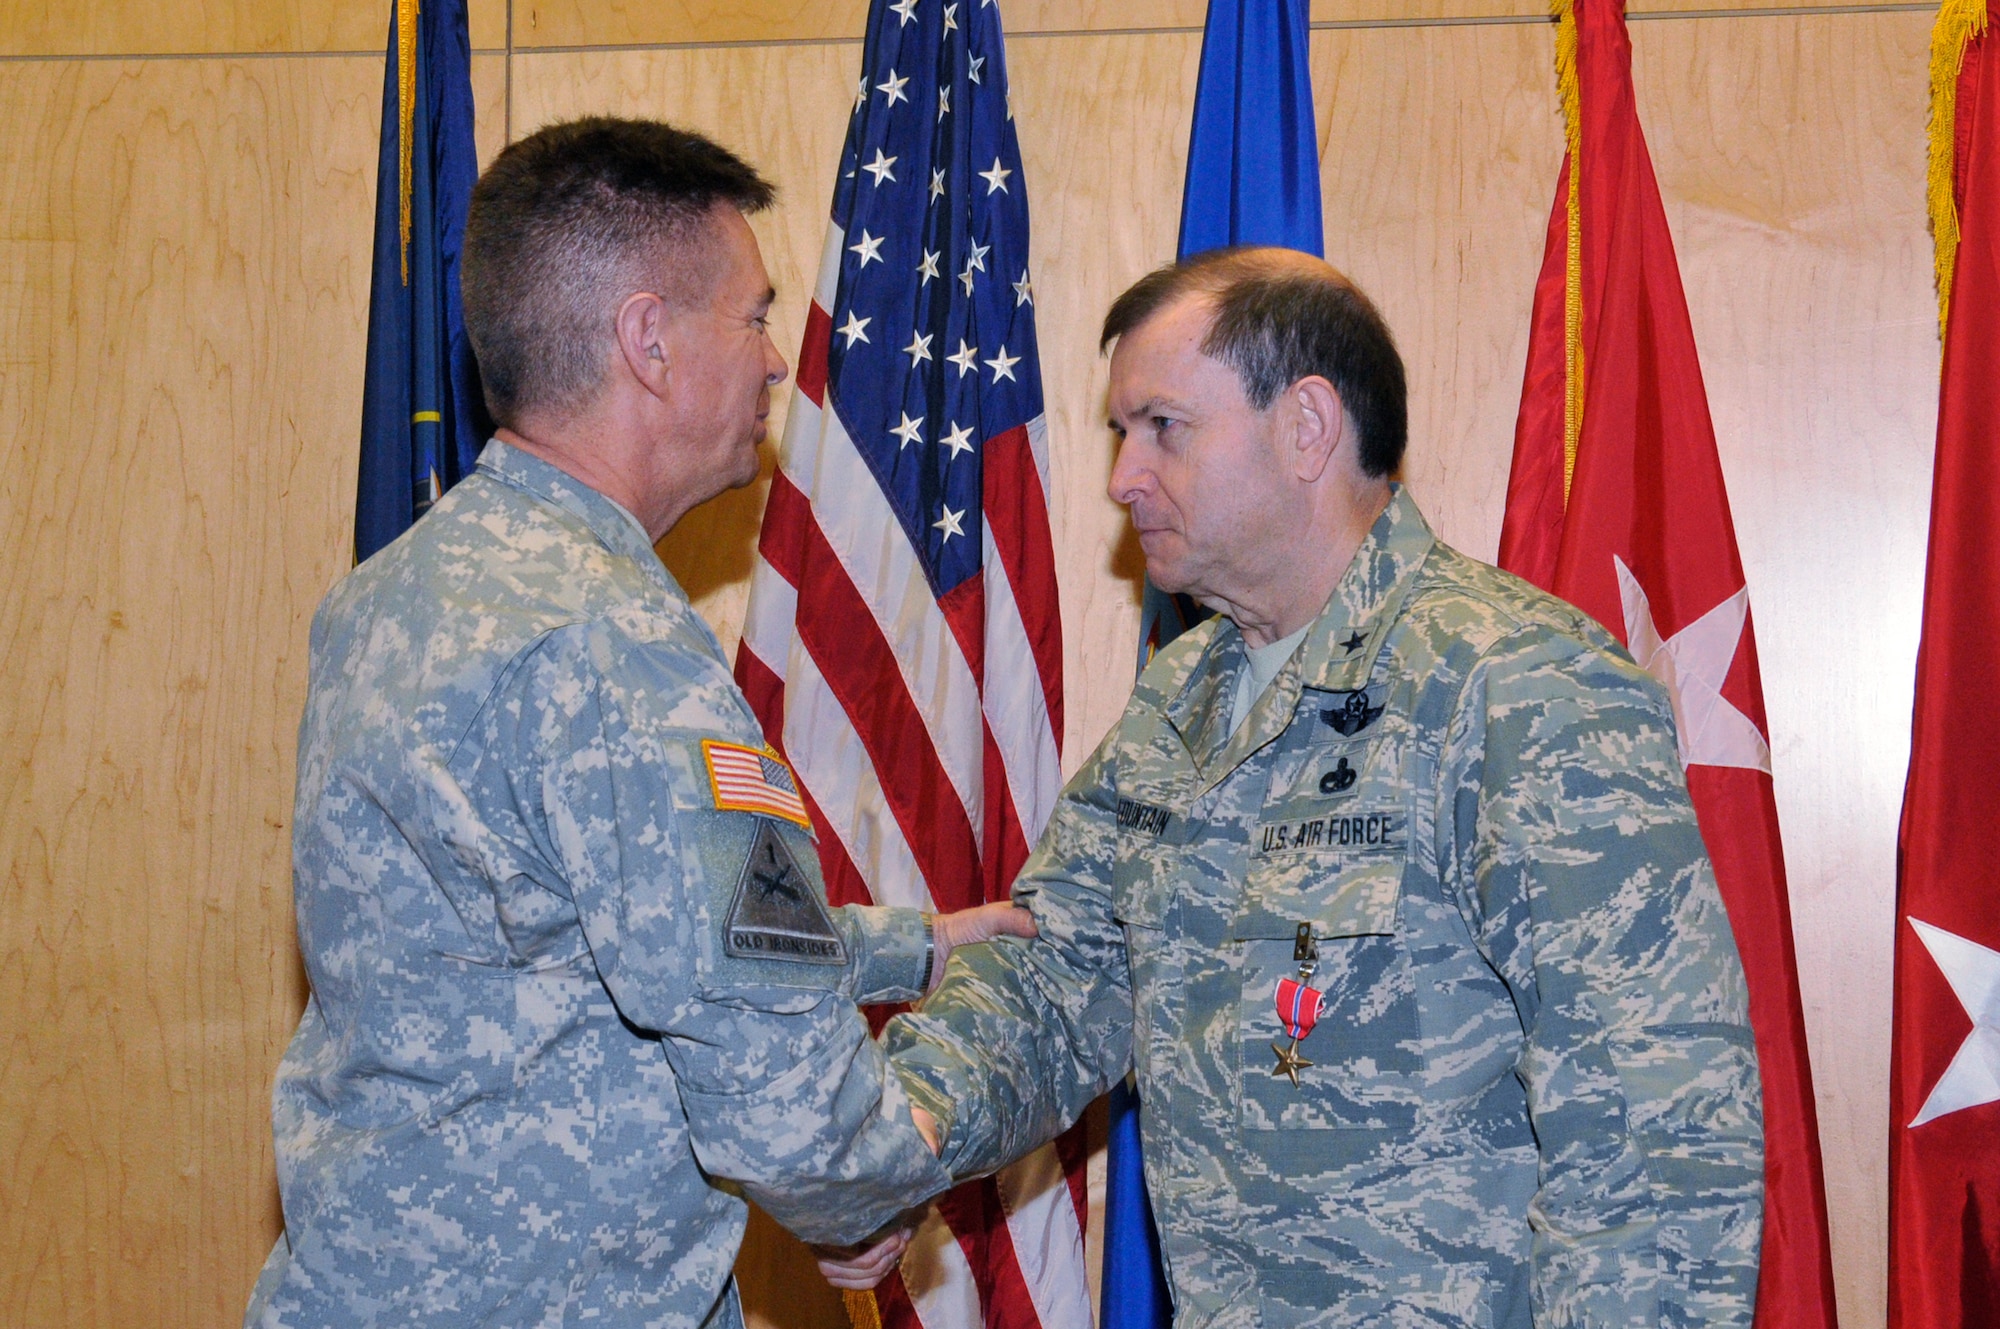 Maj. Gen. Jefferson S. Burton, Adjutant General of the Utah National guard, presents a Bronze Star Medal to Brig. Gen. David R. Fountain, the Assistant Adjutant General for Air, Joint Task Force Headquarters, Utah Air National Guard, on January 11, 2014.  Fountain received the award for meritorious achievement during his deployment in support of Operation Enduring Freedom from March 28, 2013 to January 8, 2014. (Utah National Guard Photo by SSgt Annie Edwards/Released)